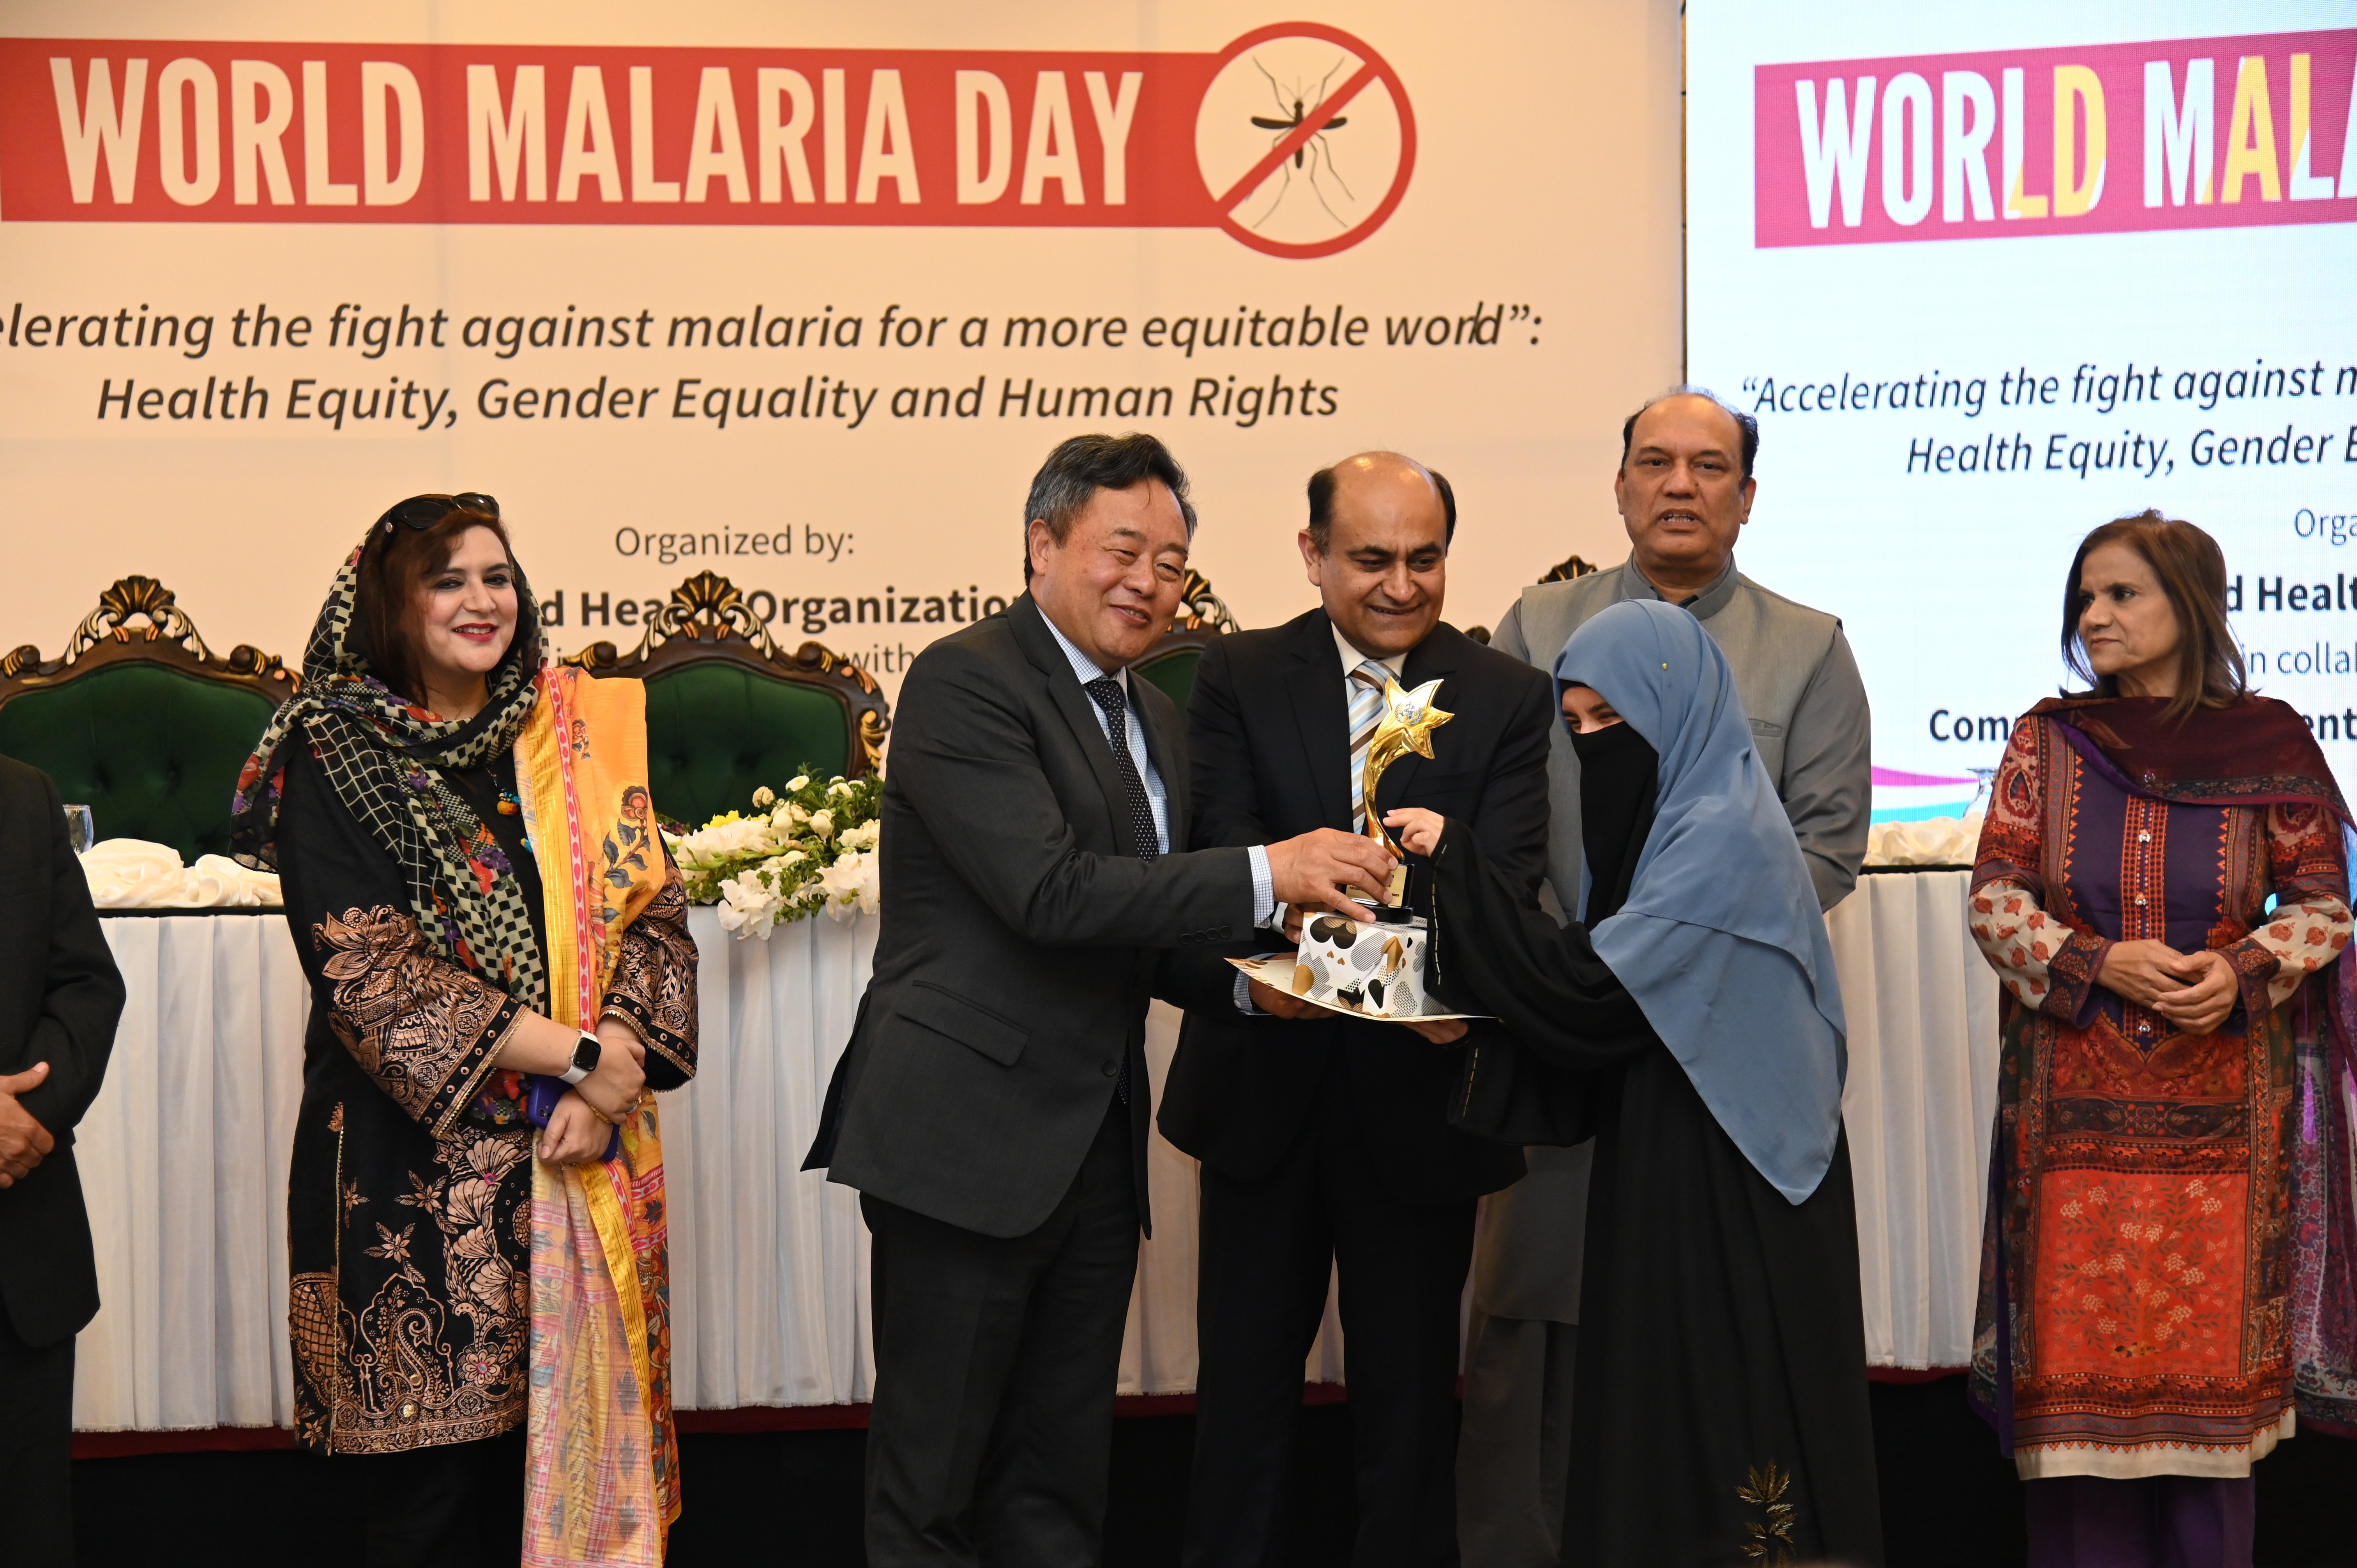 The shield distribution at the event of World Malaria Day 2026